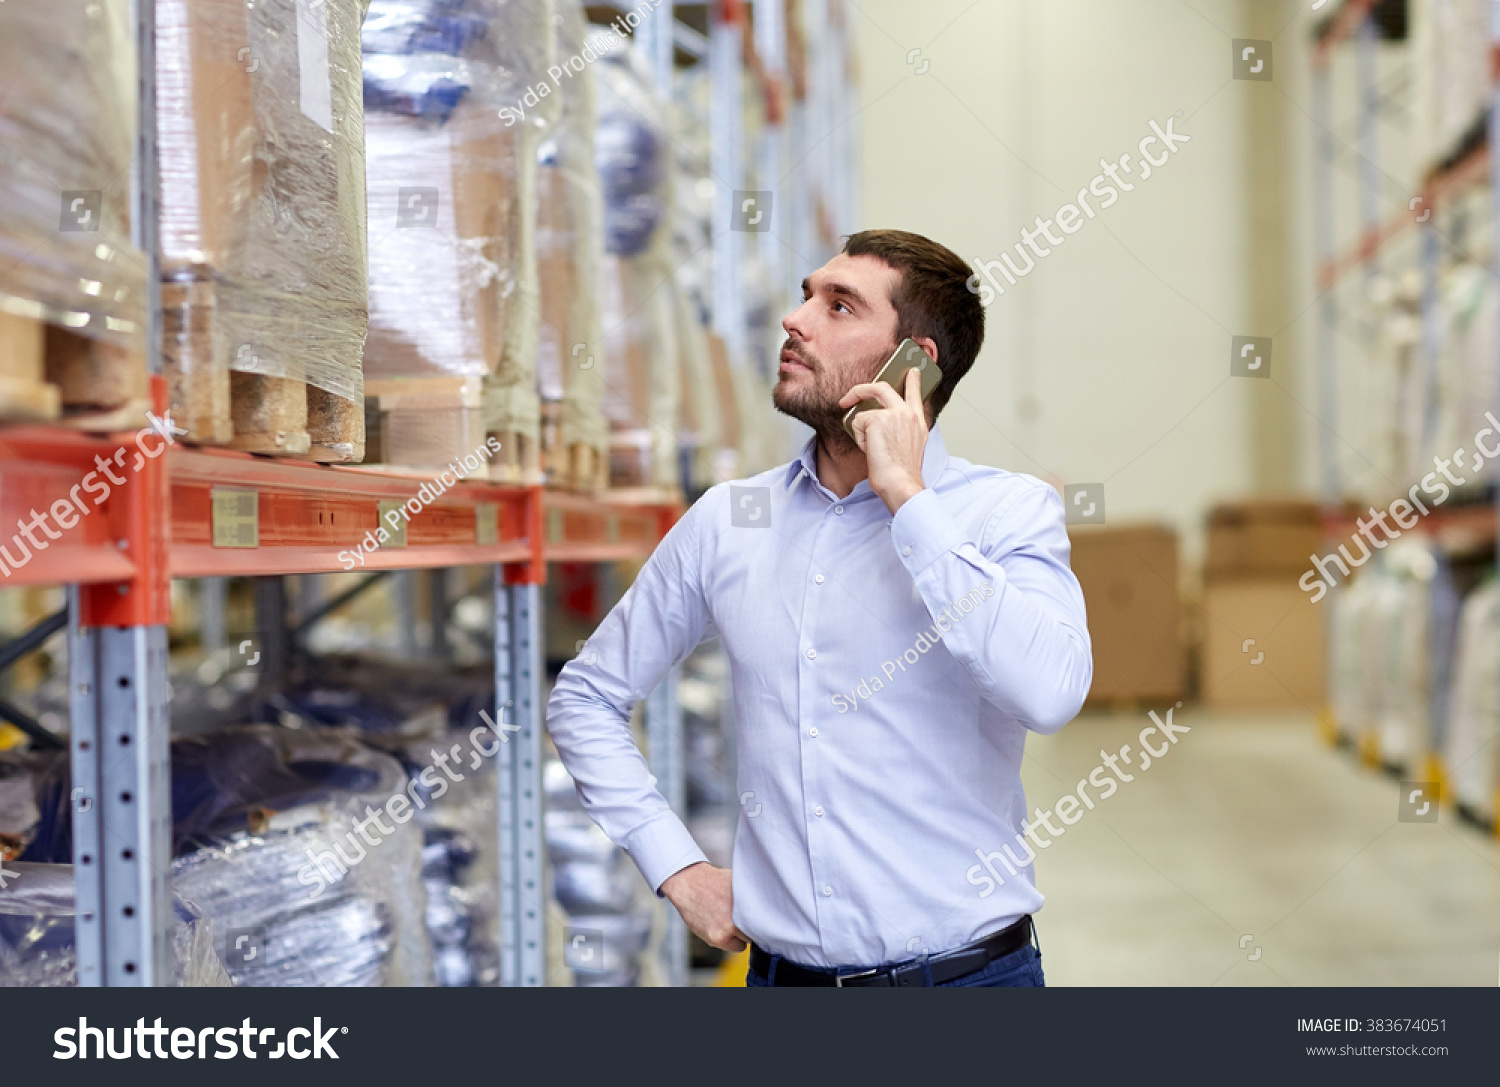 wholesale, logistic, business, export and people concept - serious businessman calling on smartphone at warehouse #383674051